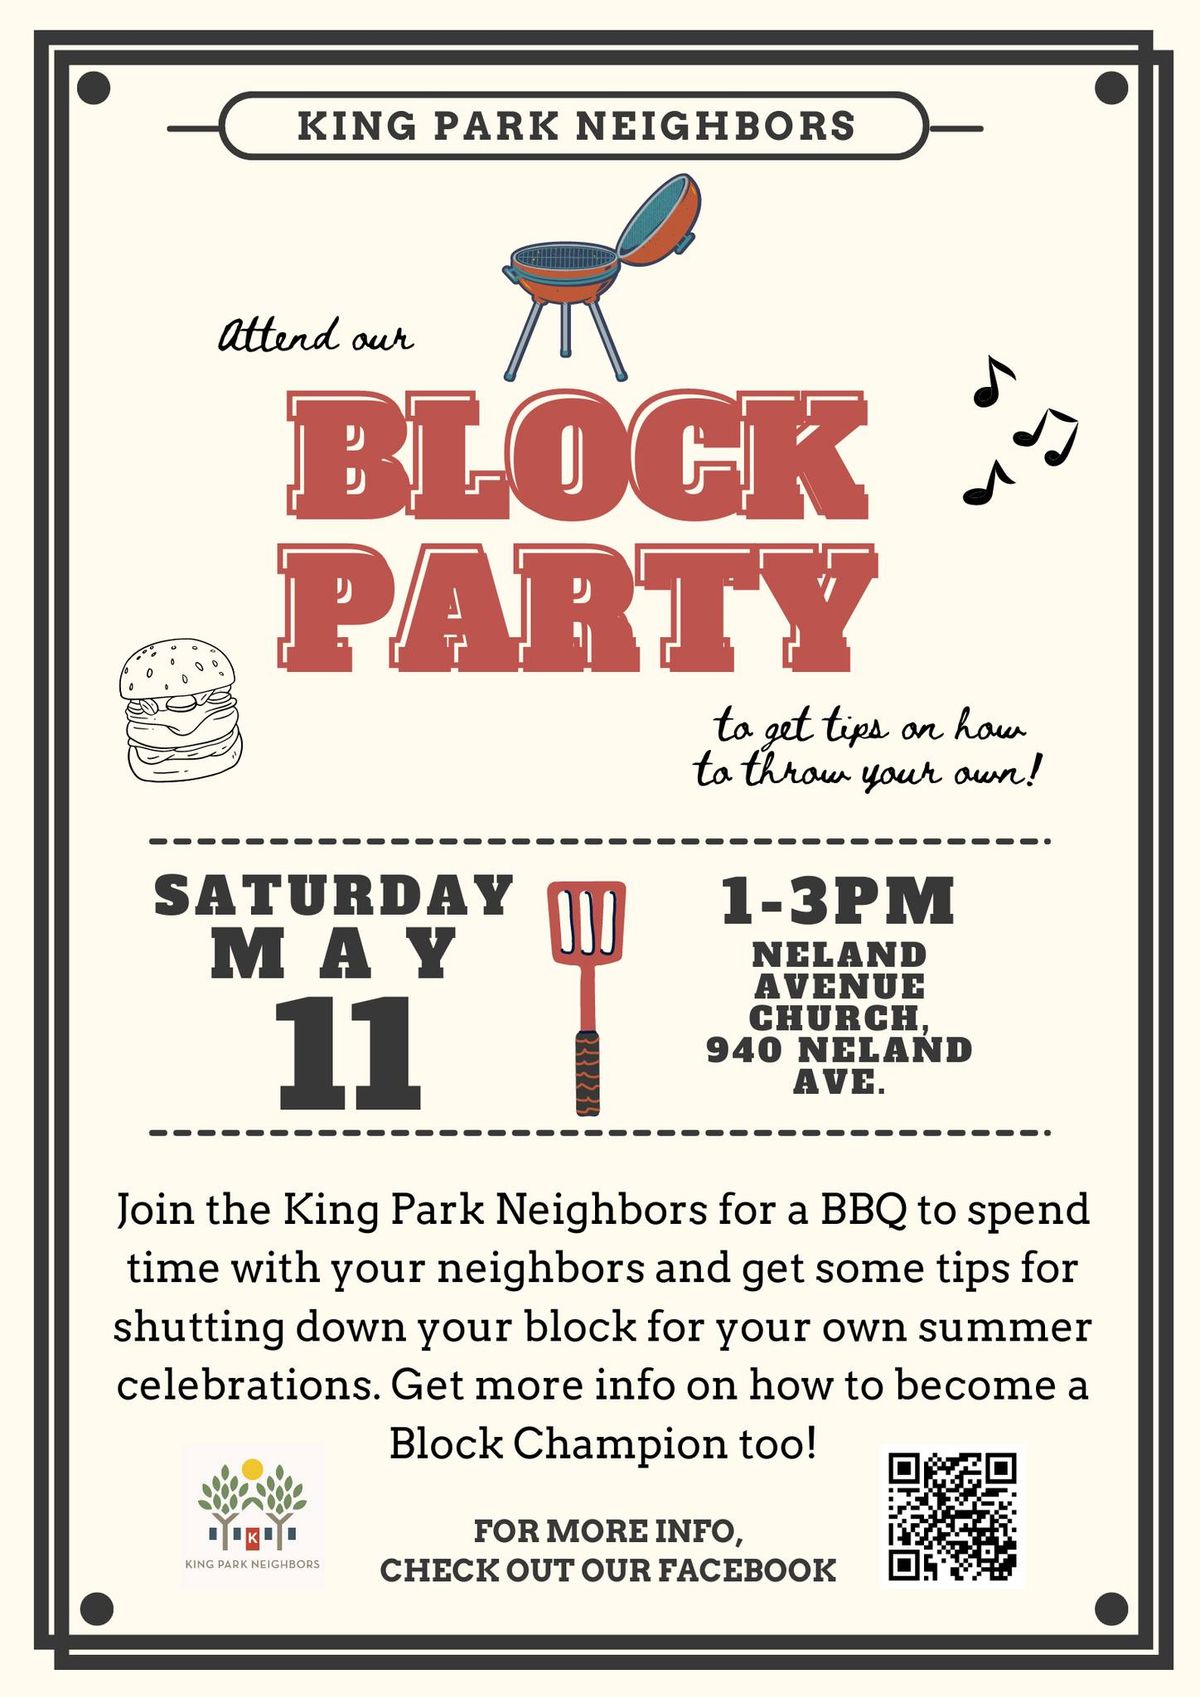 Block Party for King Park Neighbors